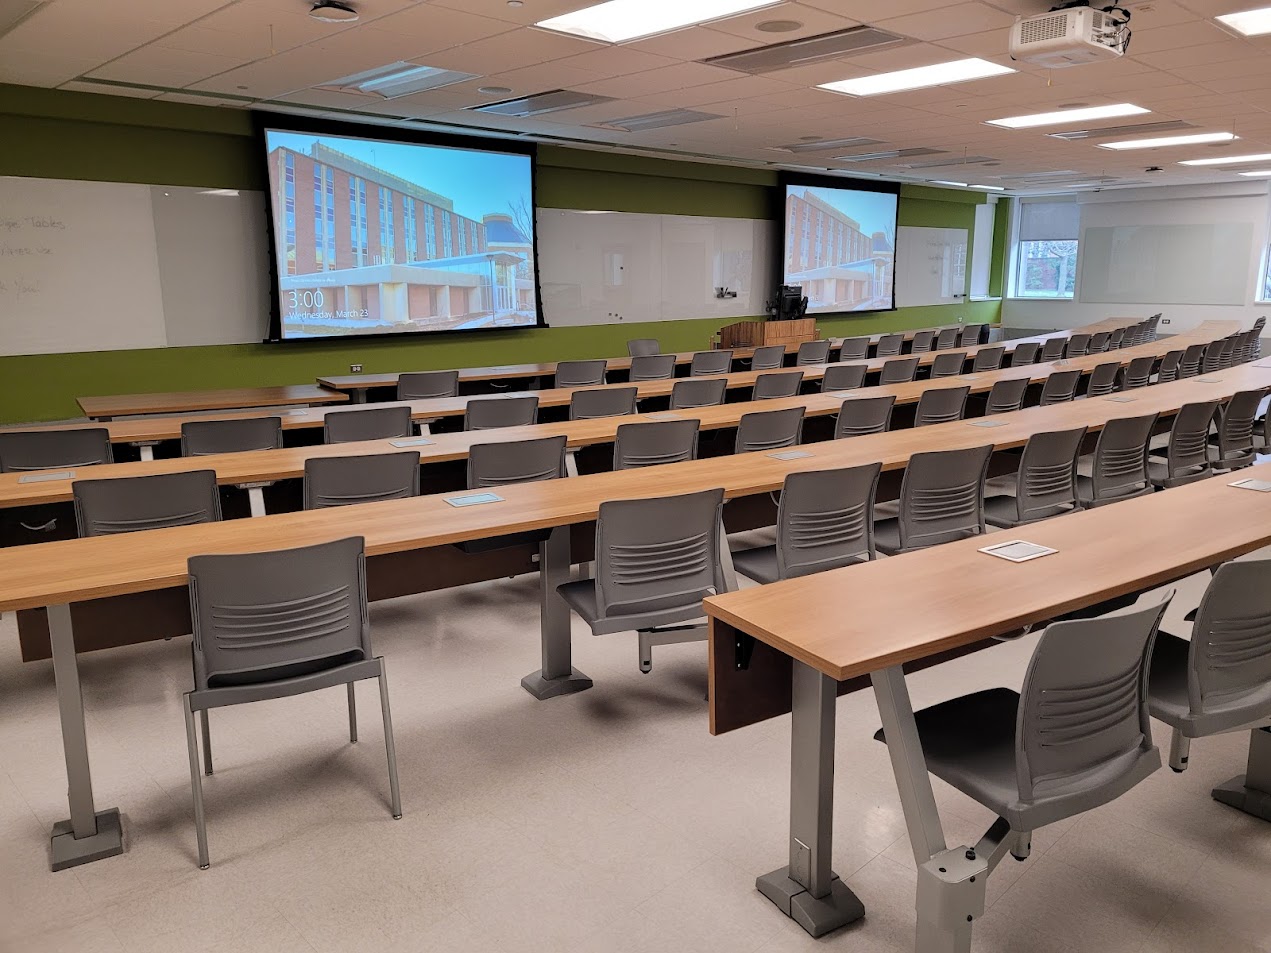 A view of the classroom with fixed tables and chairs, white boards, and instructor table in front